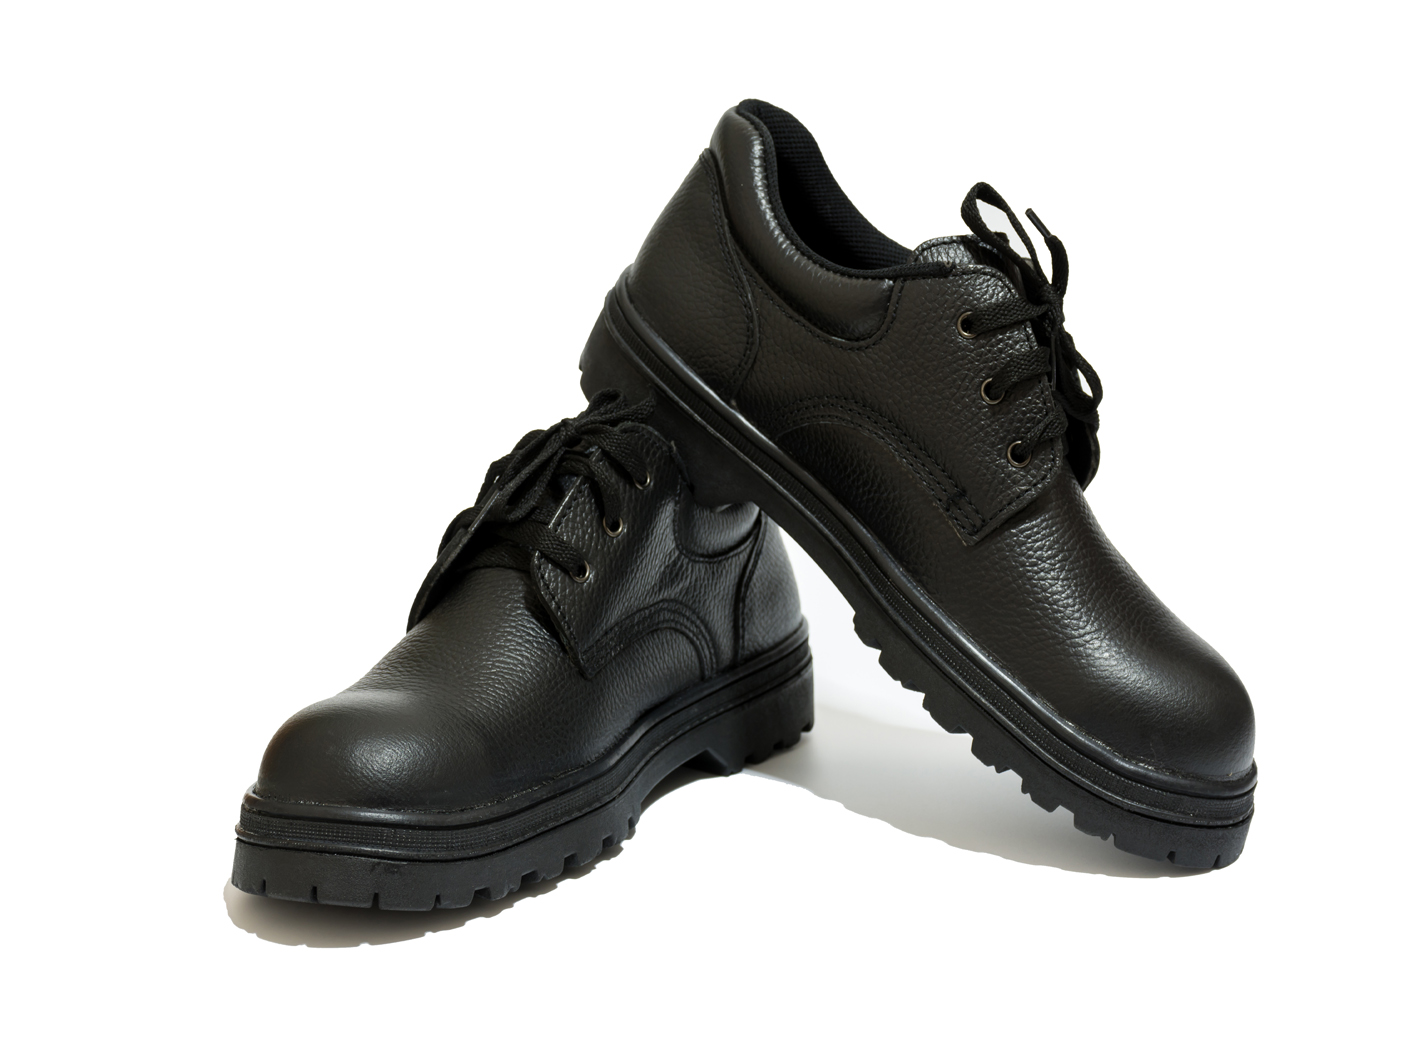 15 Best Safety Shoes Reviewed & Rated in 2018 | Nicershoes